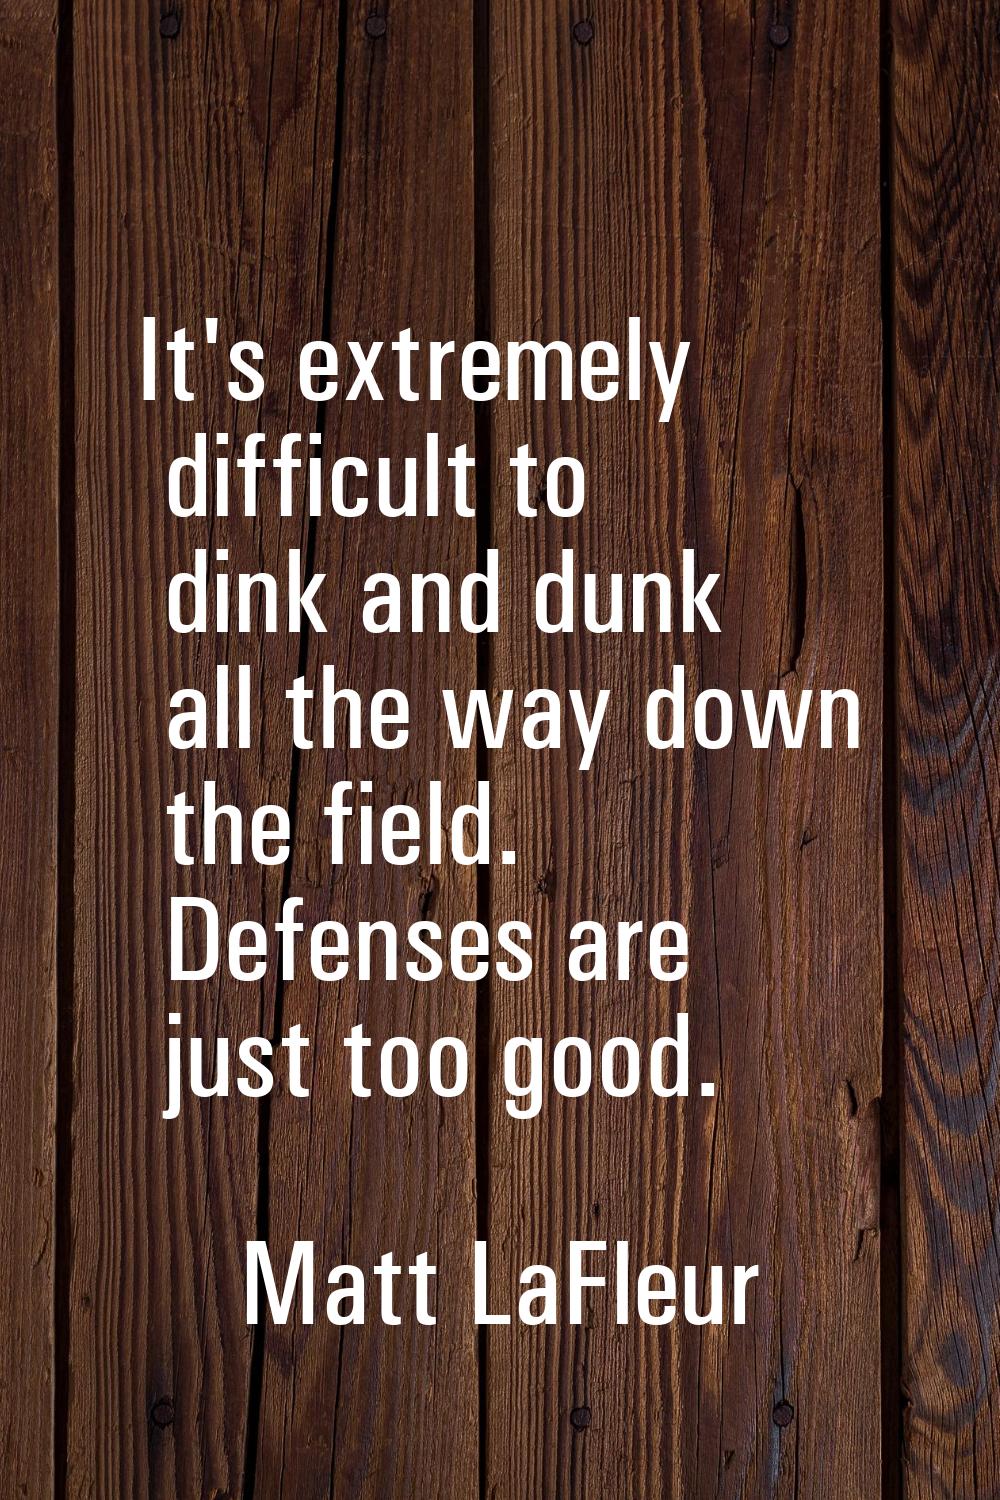 It's extremely difficult to dink and dunk all the way down the field. Defenses are just too good.